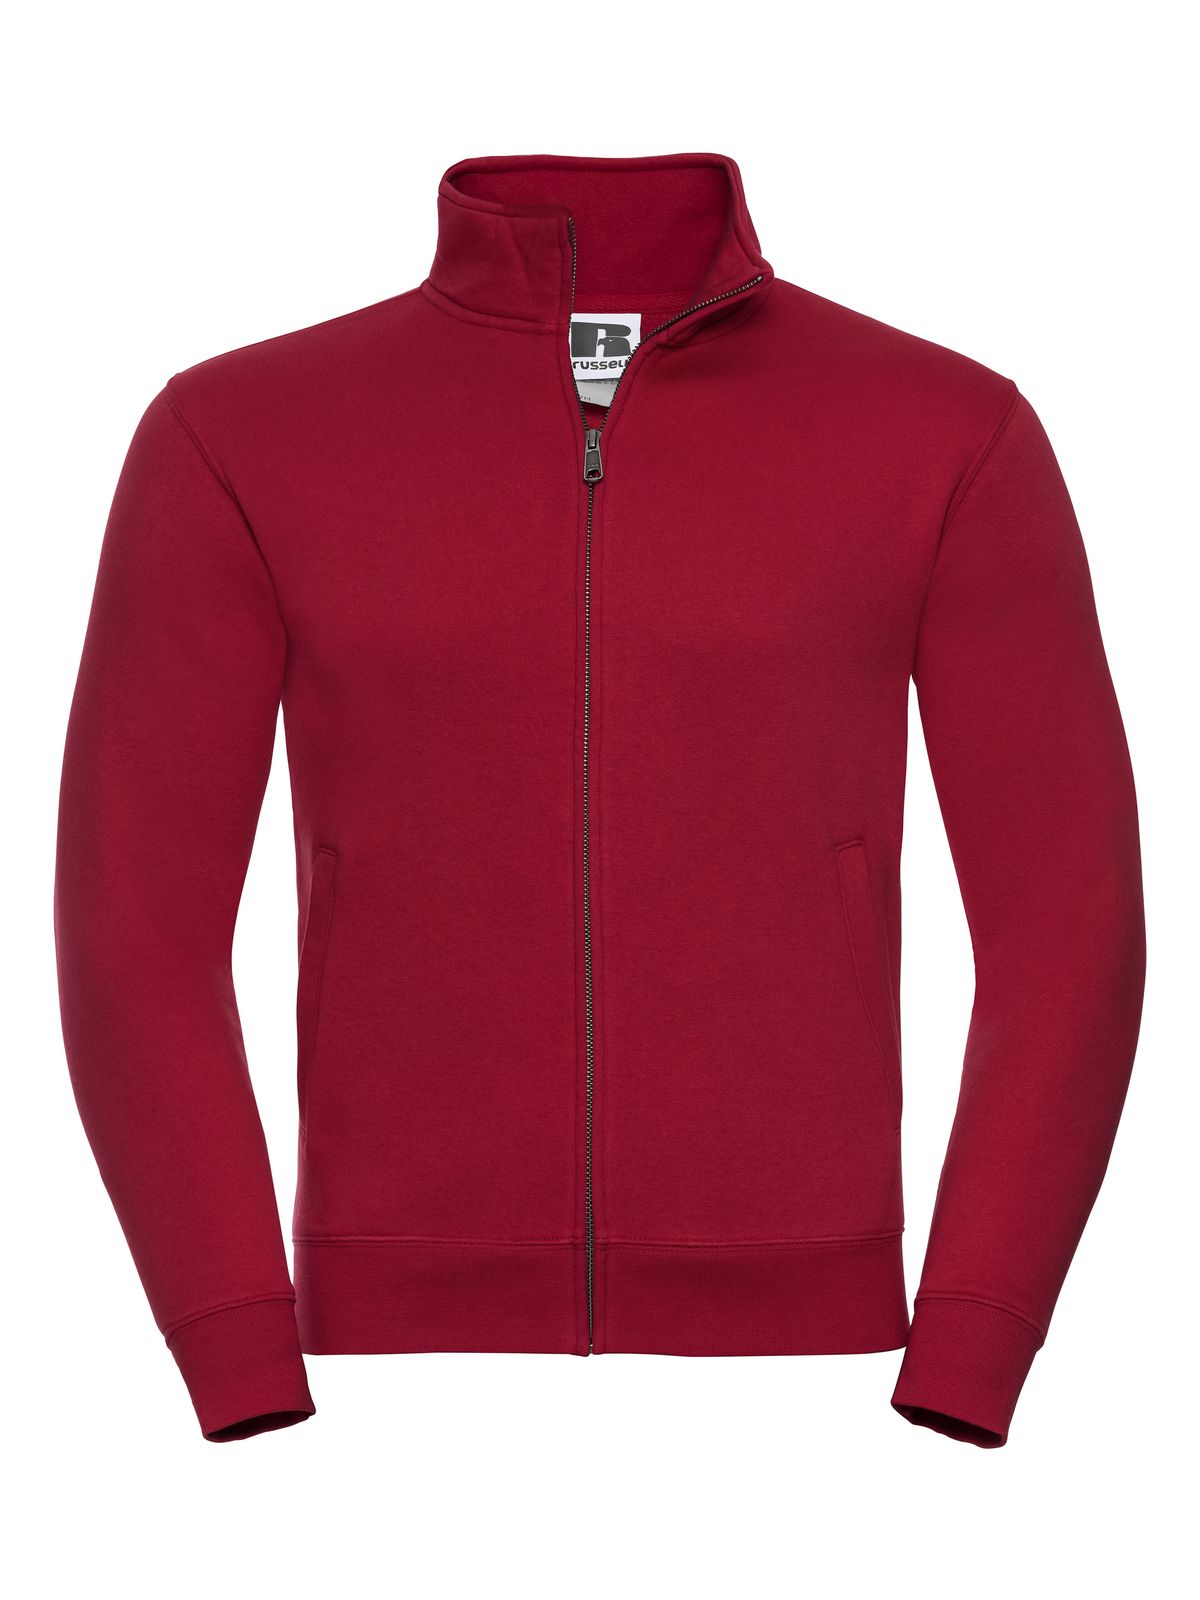 mens-authentic-sweat-jacket-classic-red.webp